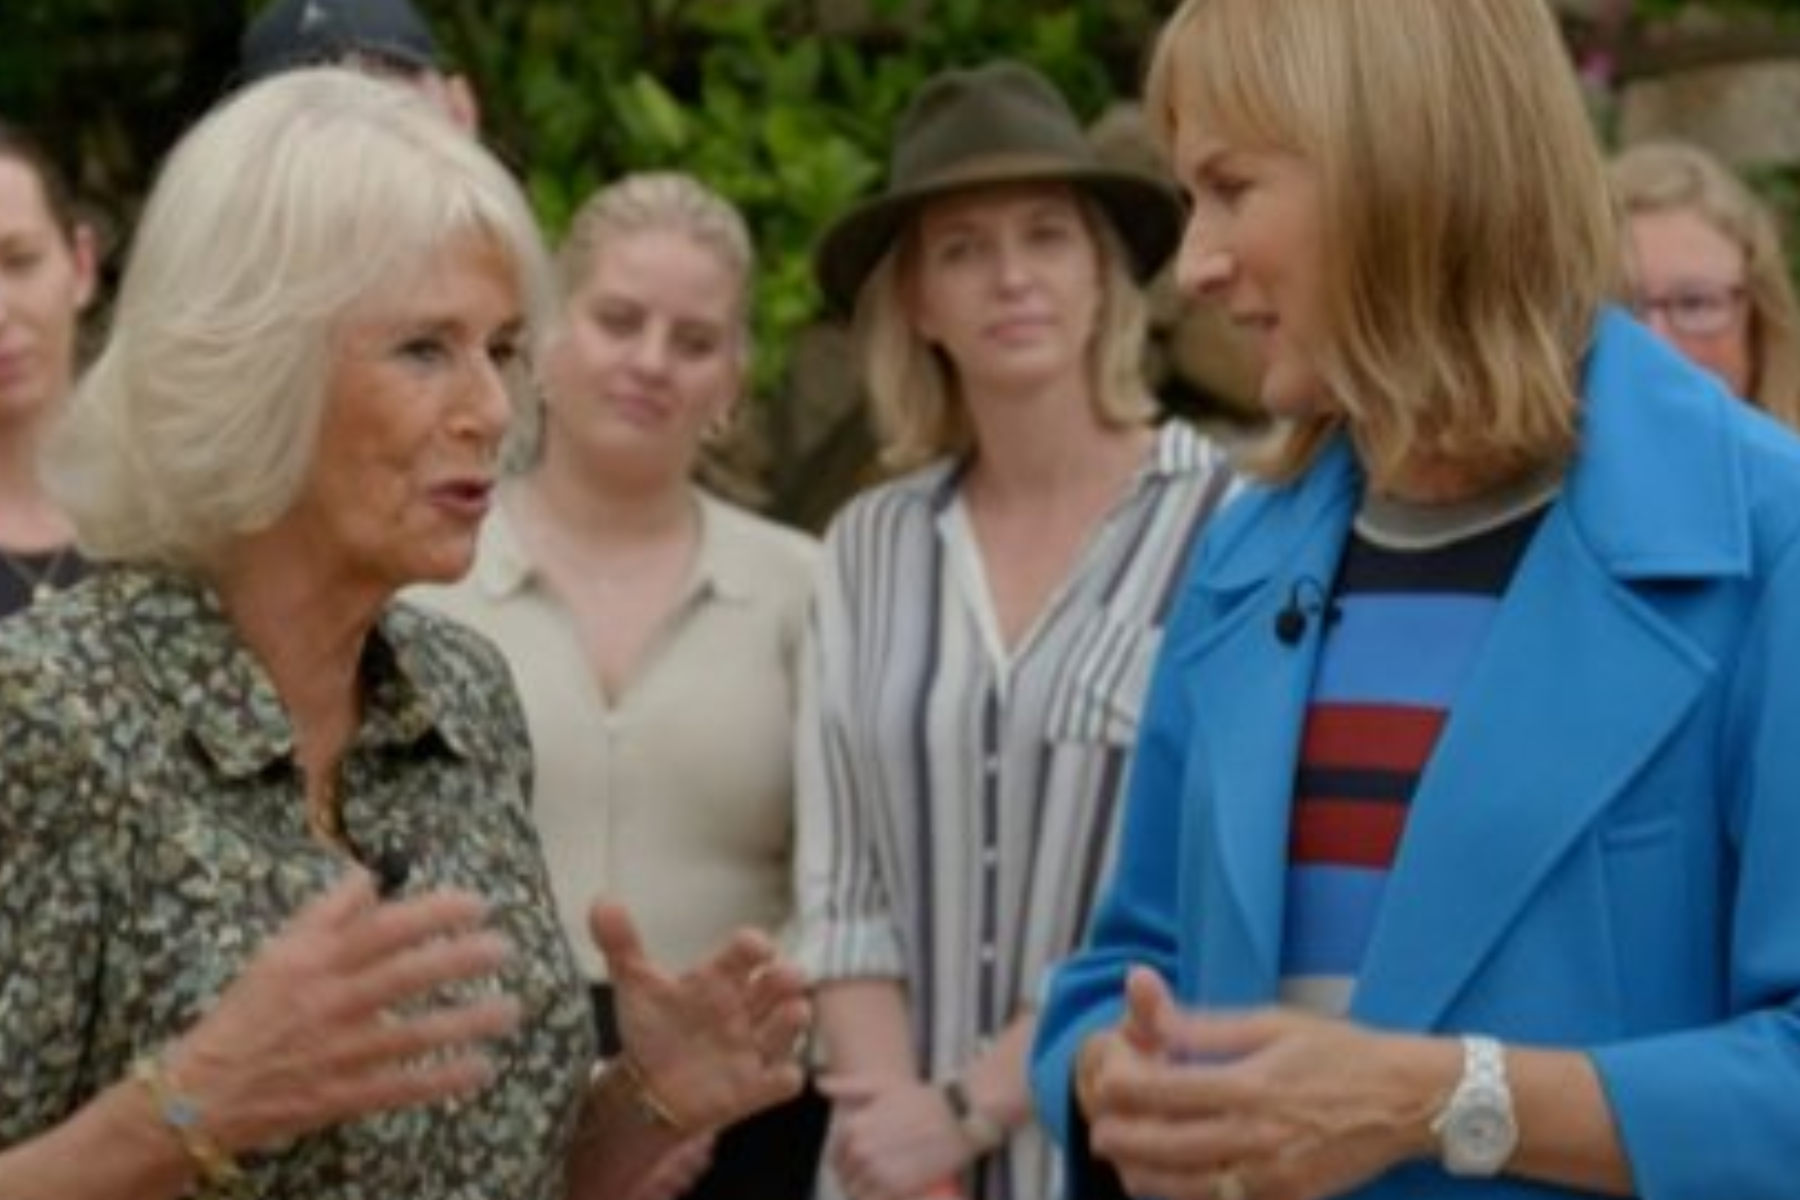 In an antique roadshow, Queen Camilla speaks with a host